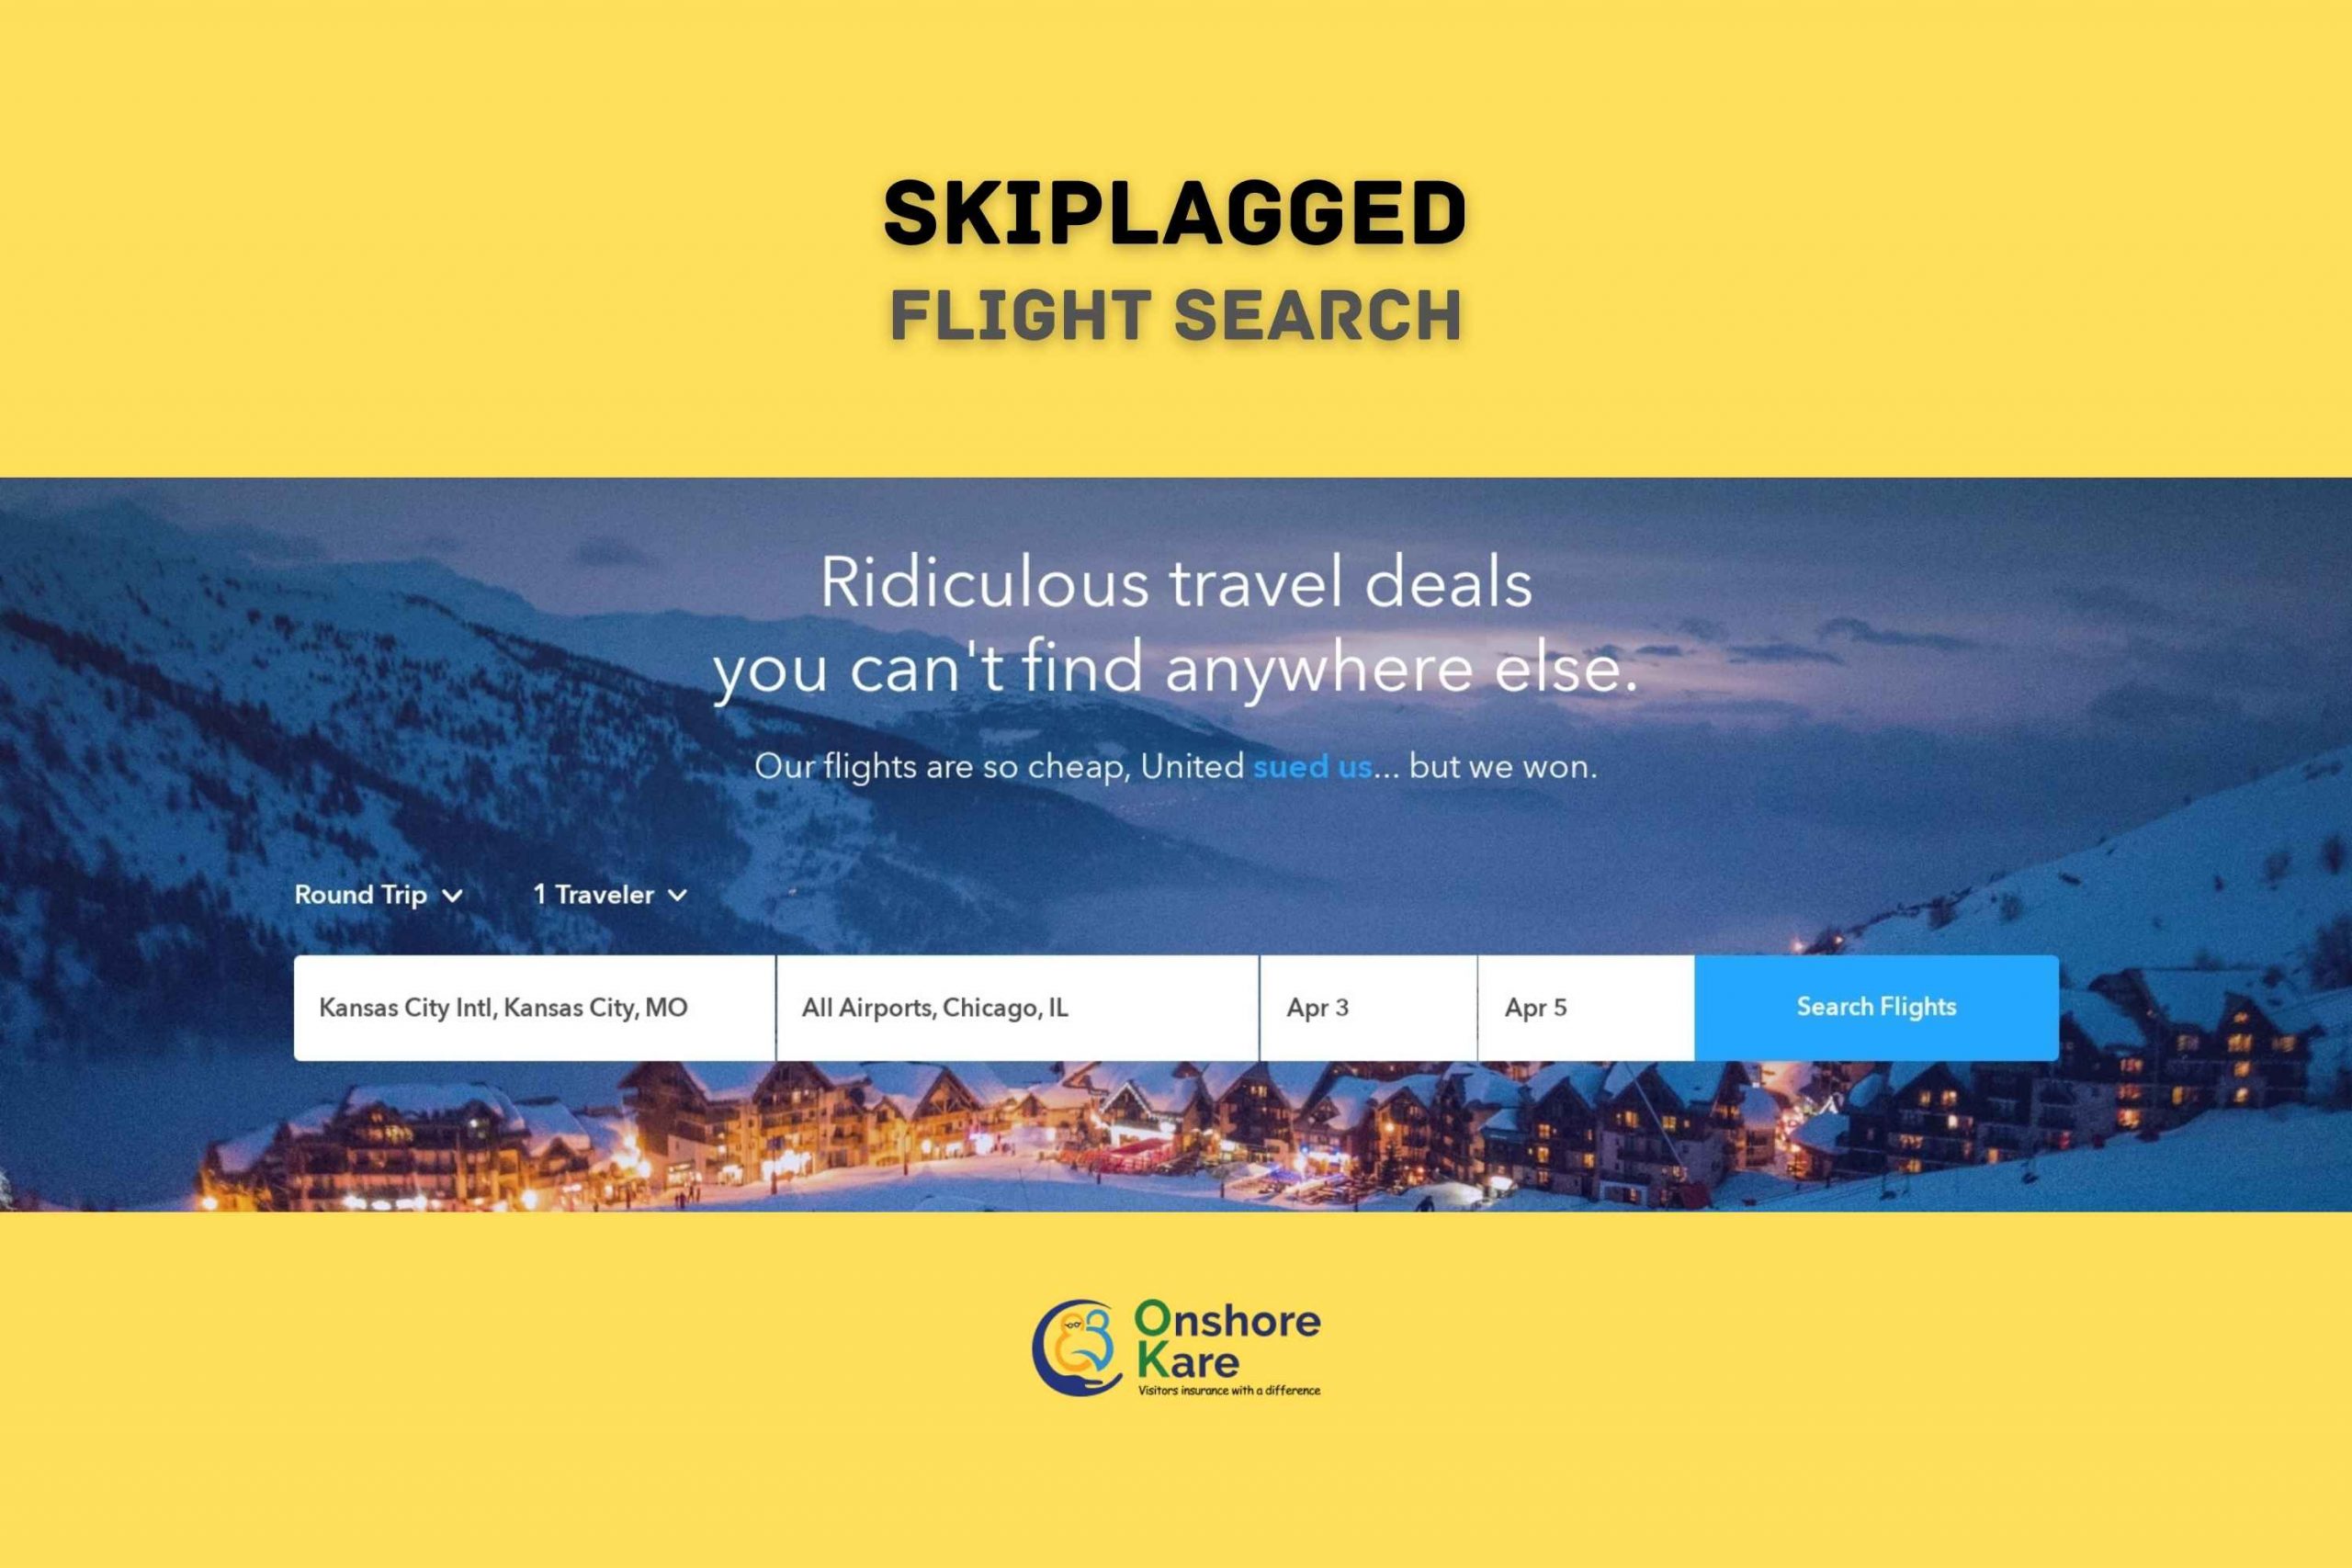 What is skiplagged and how does skiplagging work